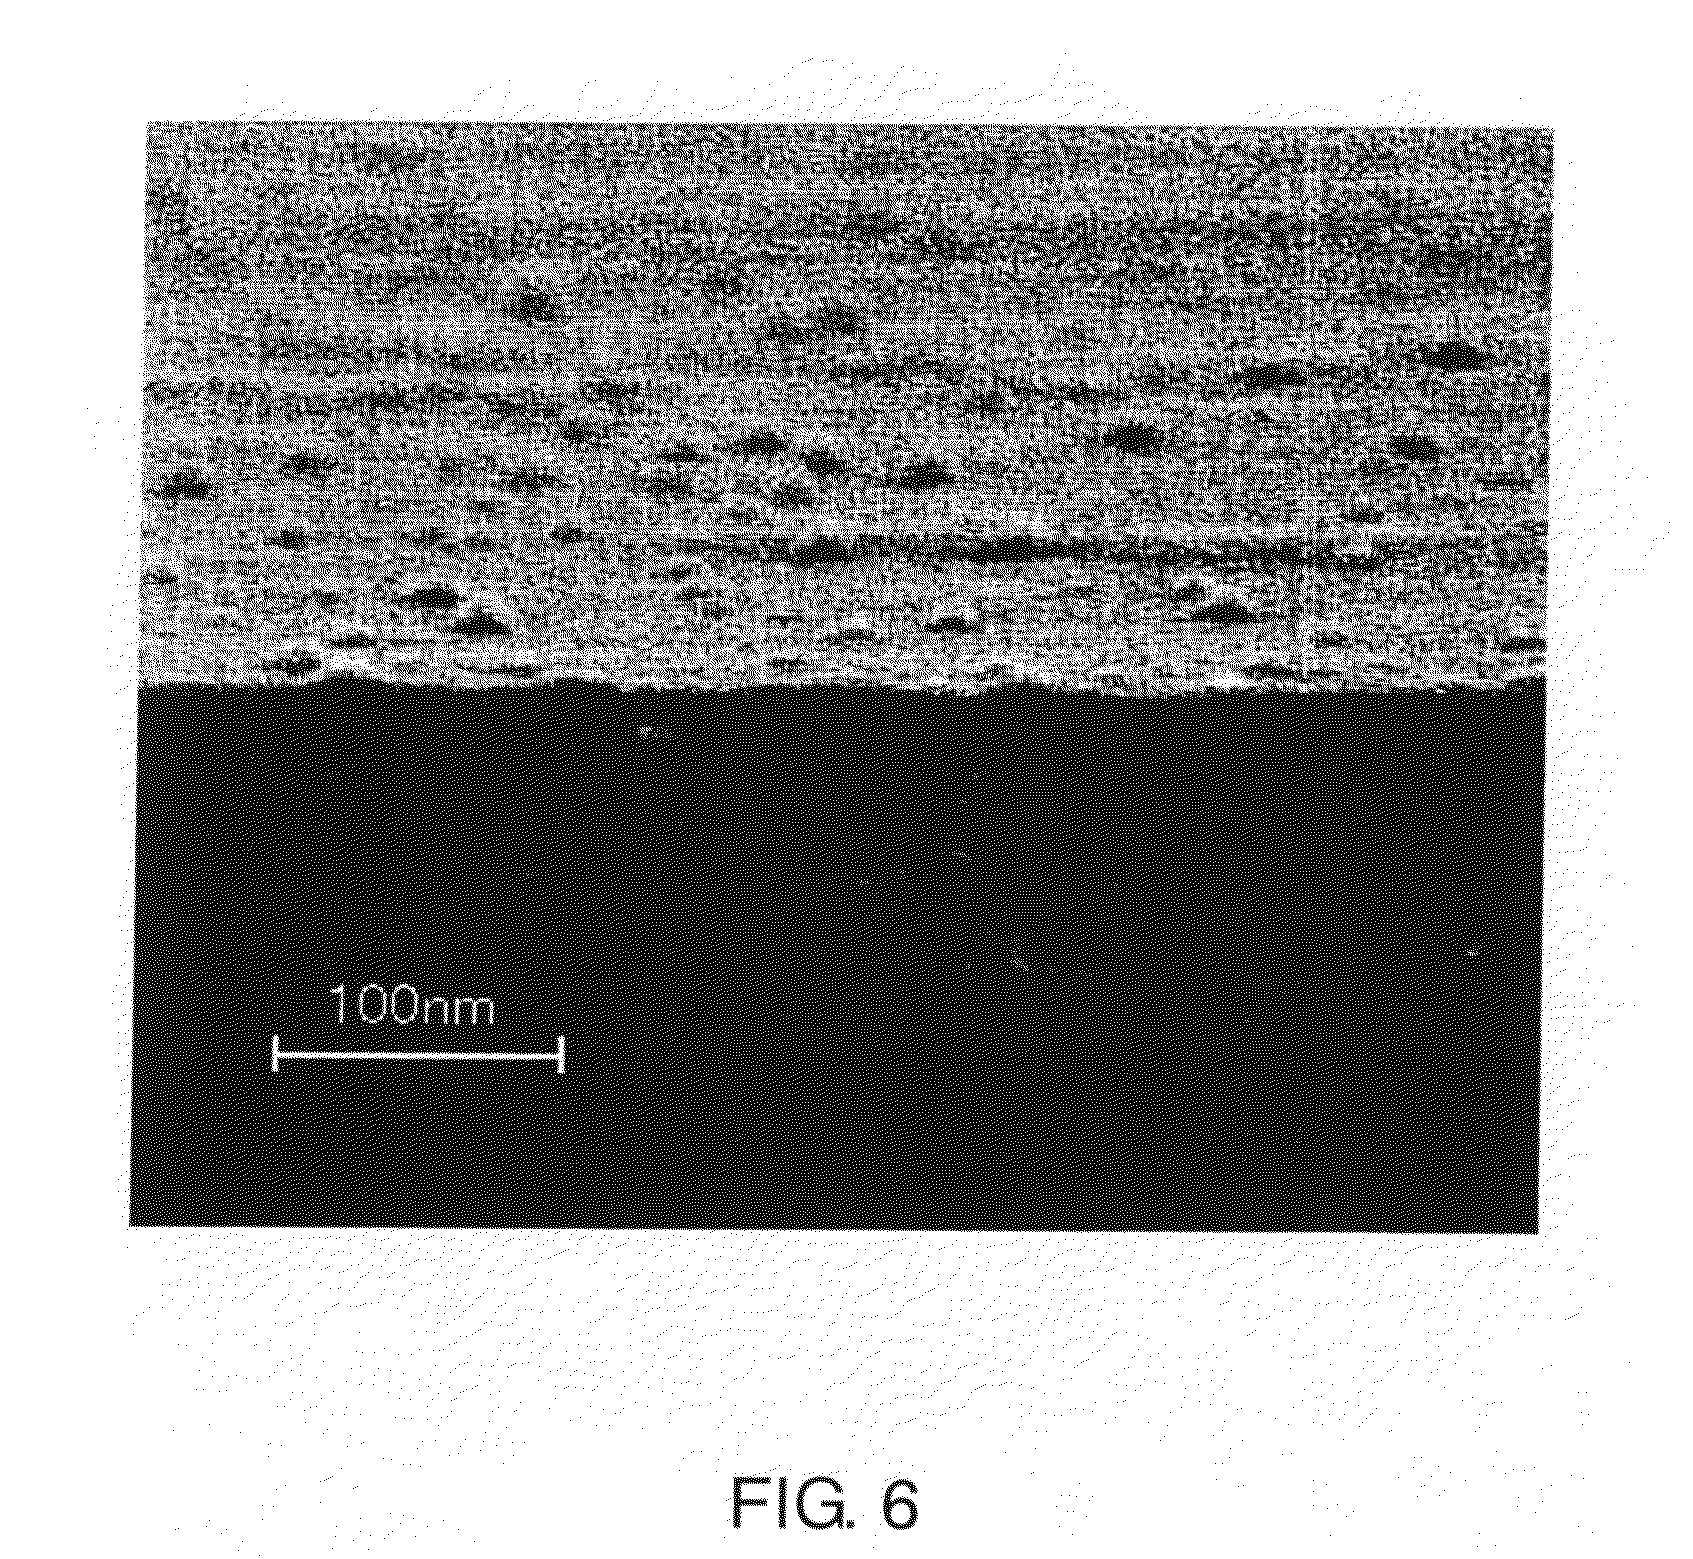 Antibacterial Substrate and Method of Manufacturing the Same